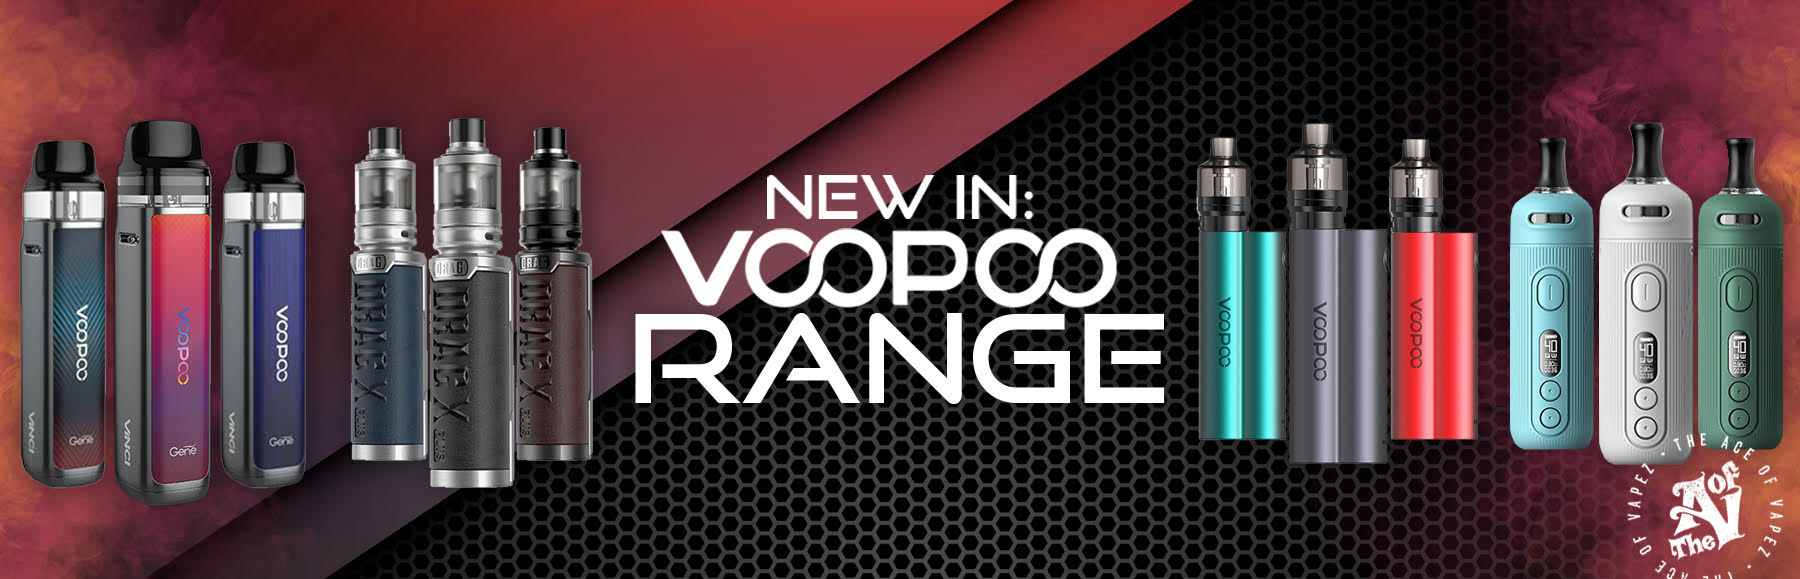 Have you seen the new Voopoo kit range?